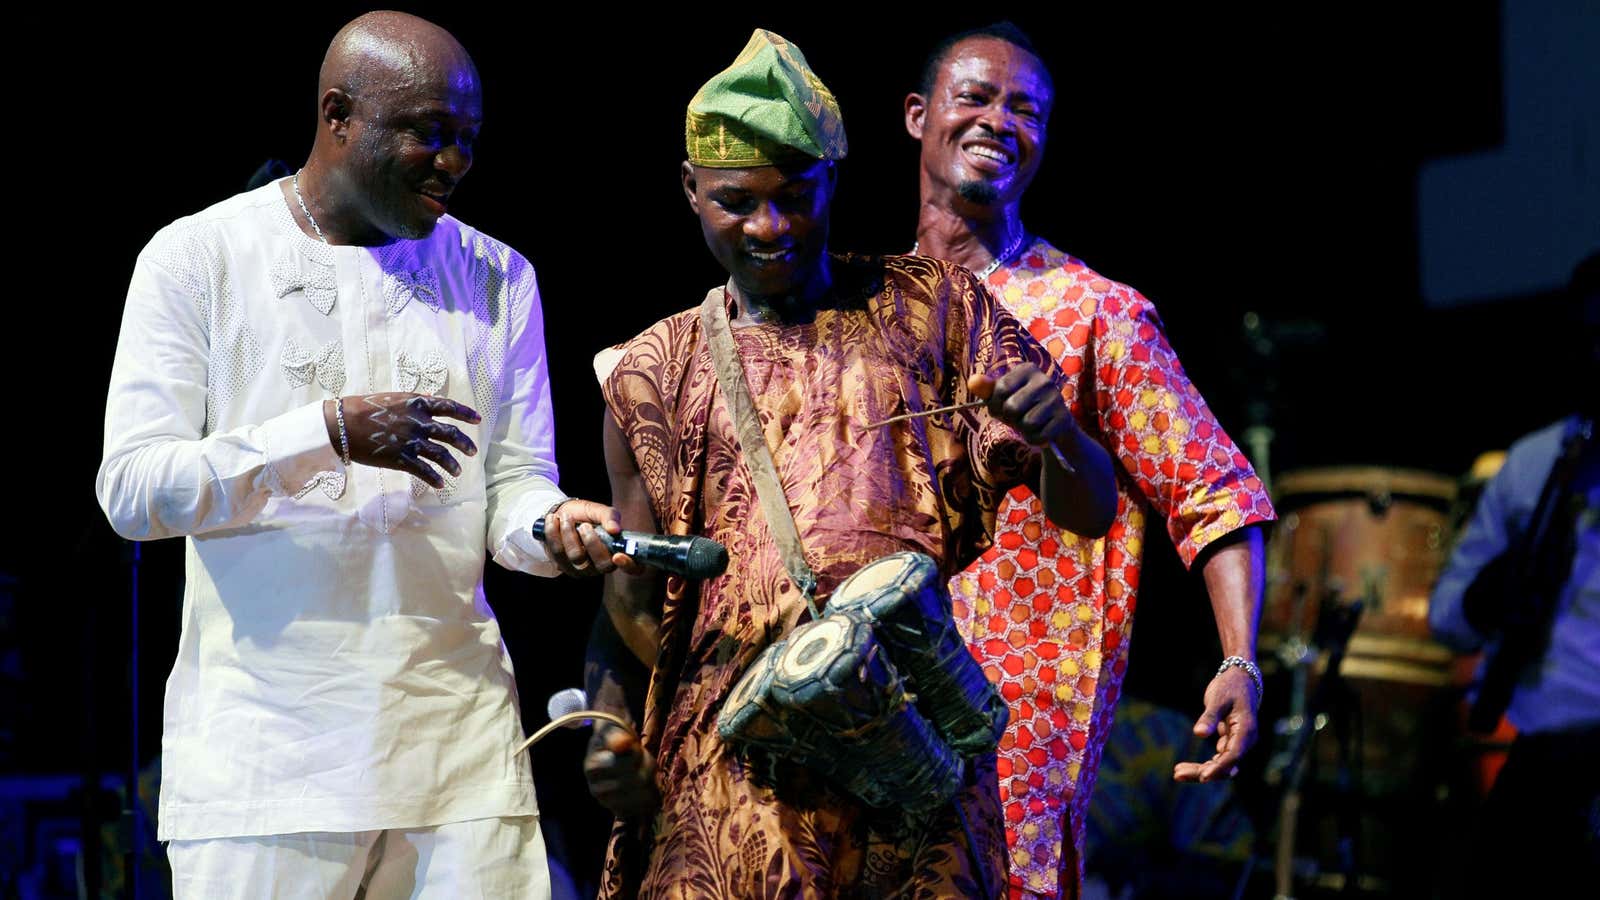 Musician Adewale Ayuba (L) performs with his band in Lagos, Nigeria in 2016